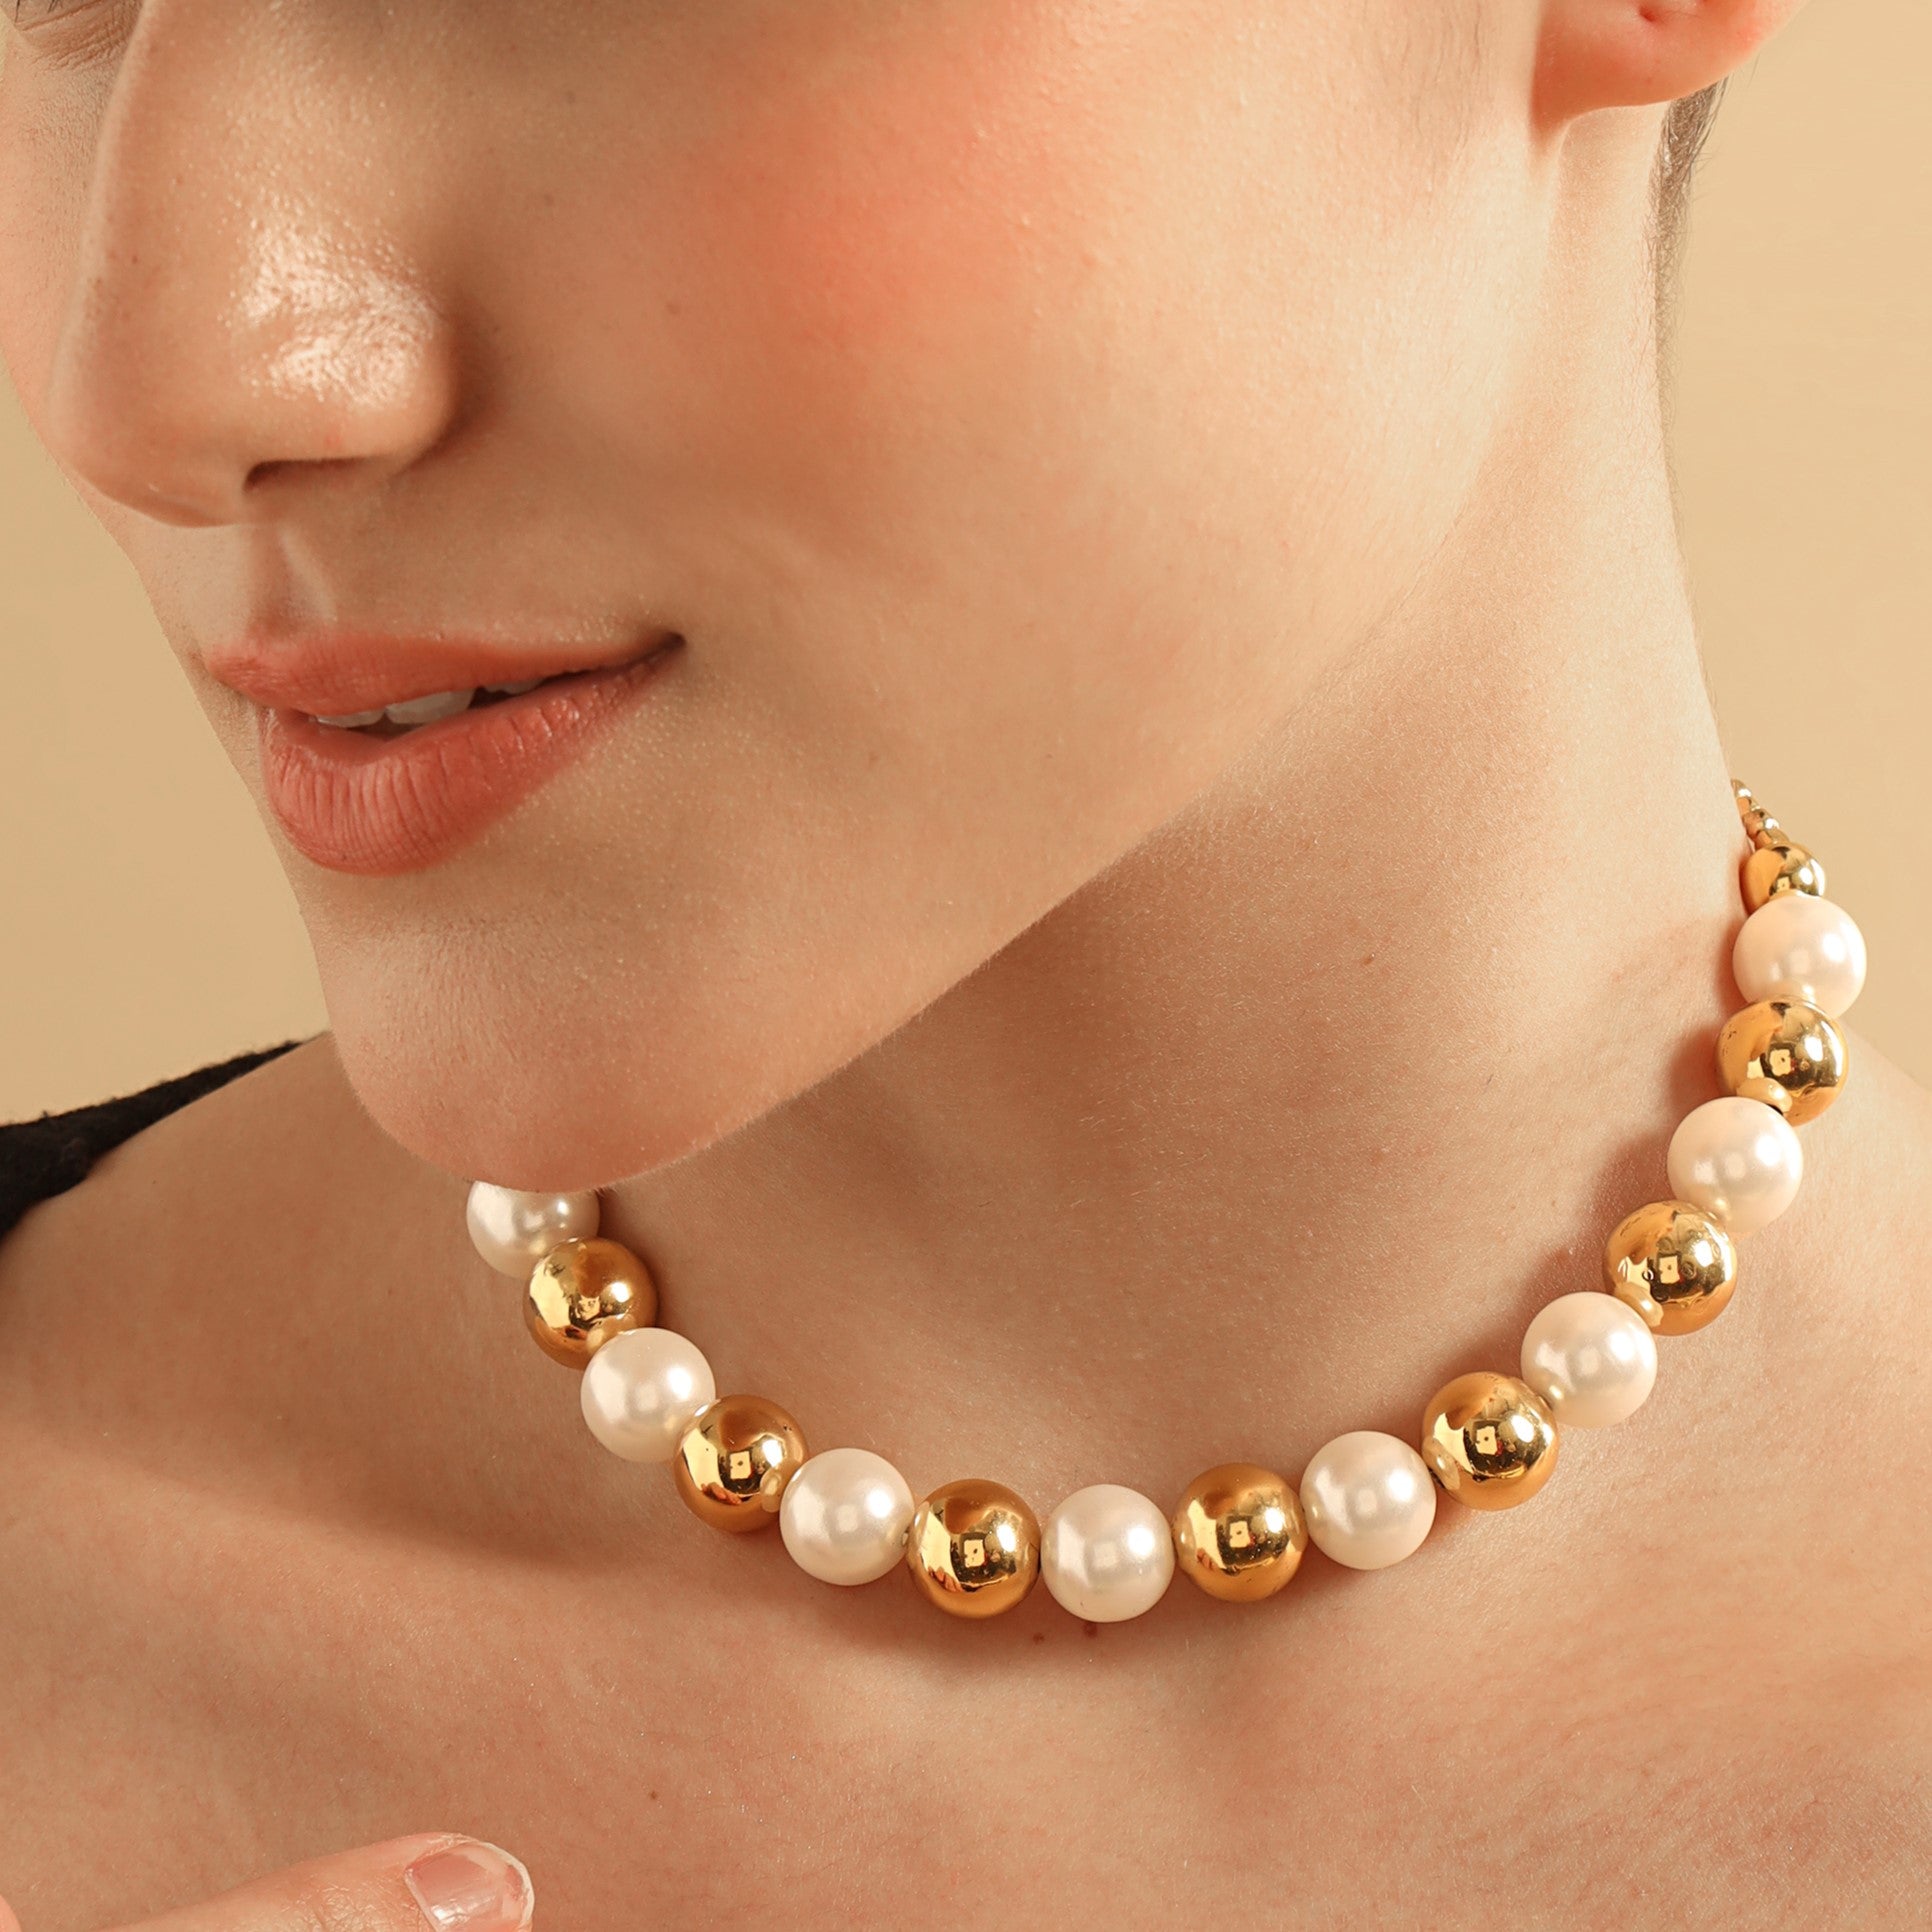 TFC Pearl and Gold Bead Choker Necklace-Enhance your elegance with our collection of gold-plated necklaces for women. Choose from stunning pendant necklaces, chic choker necklaces, and trendy layered necklaces. Our sleek and dainty designs are both affordable and anti-tarnish, ensuring lasting beauty. Enjoy the cheapest fashion jewellery, lightweight and stylish- only at The Fun Company.